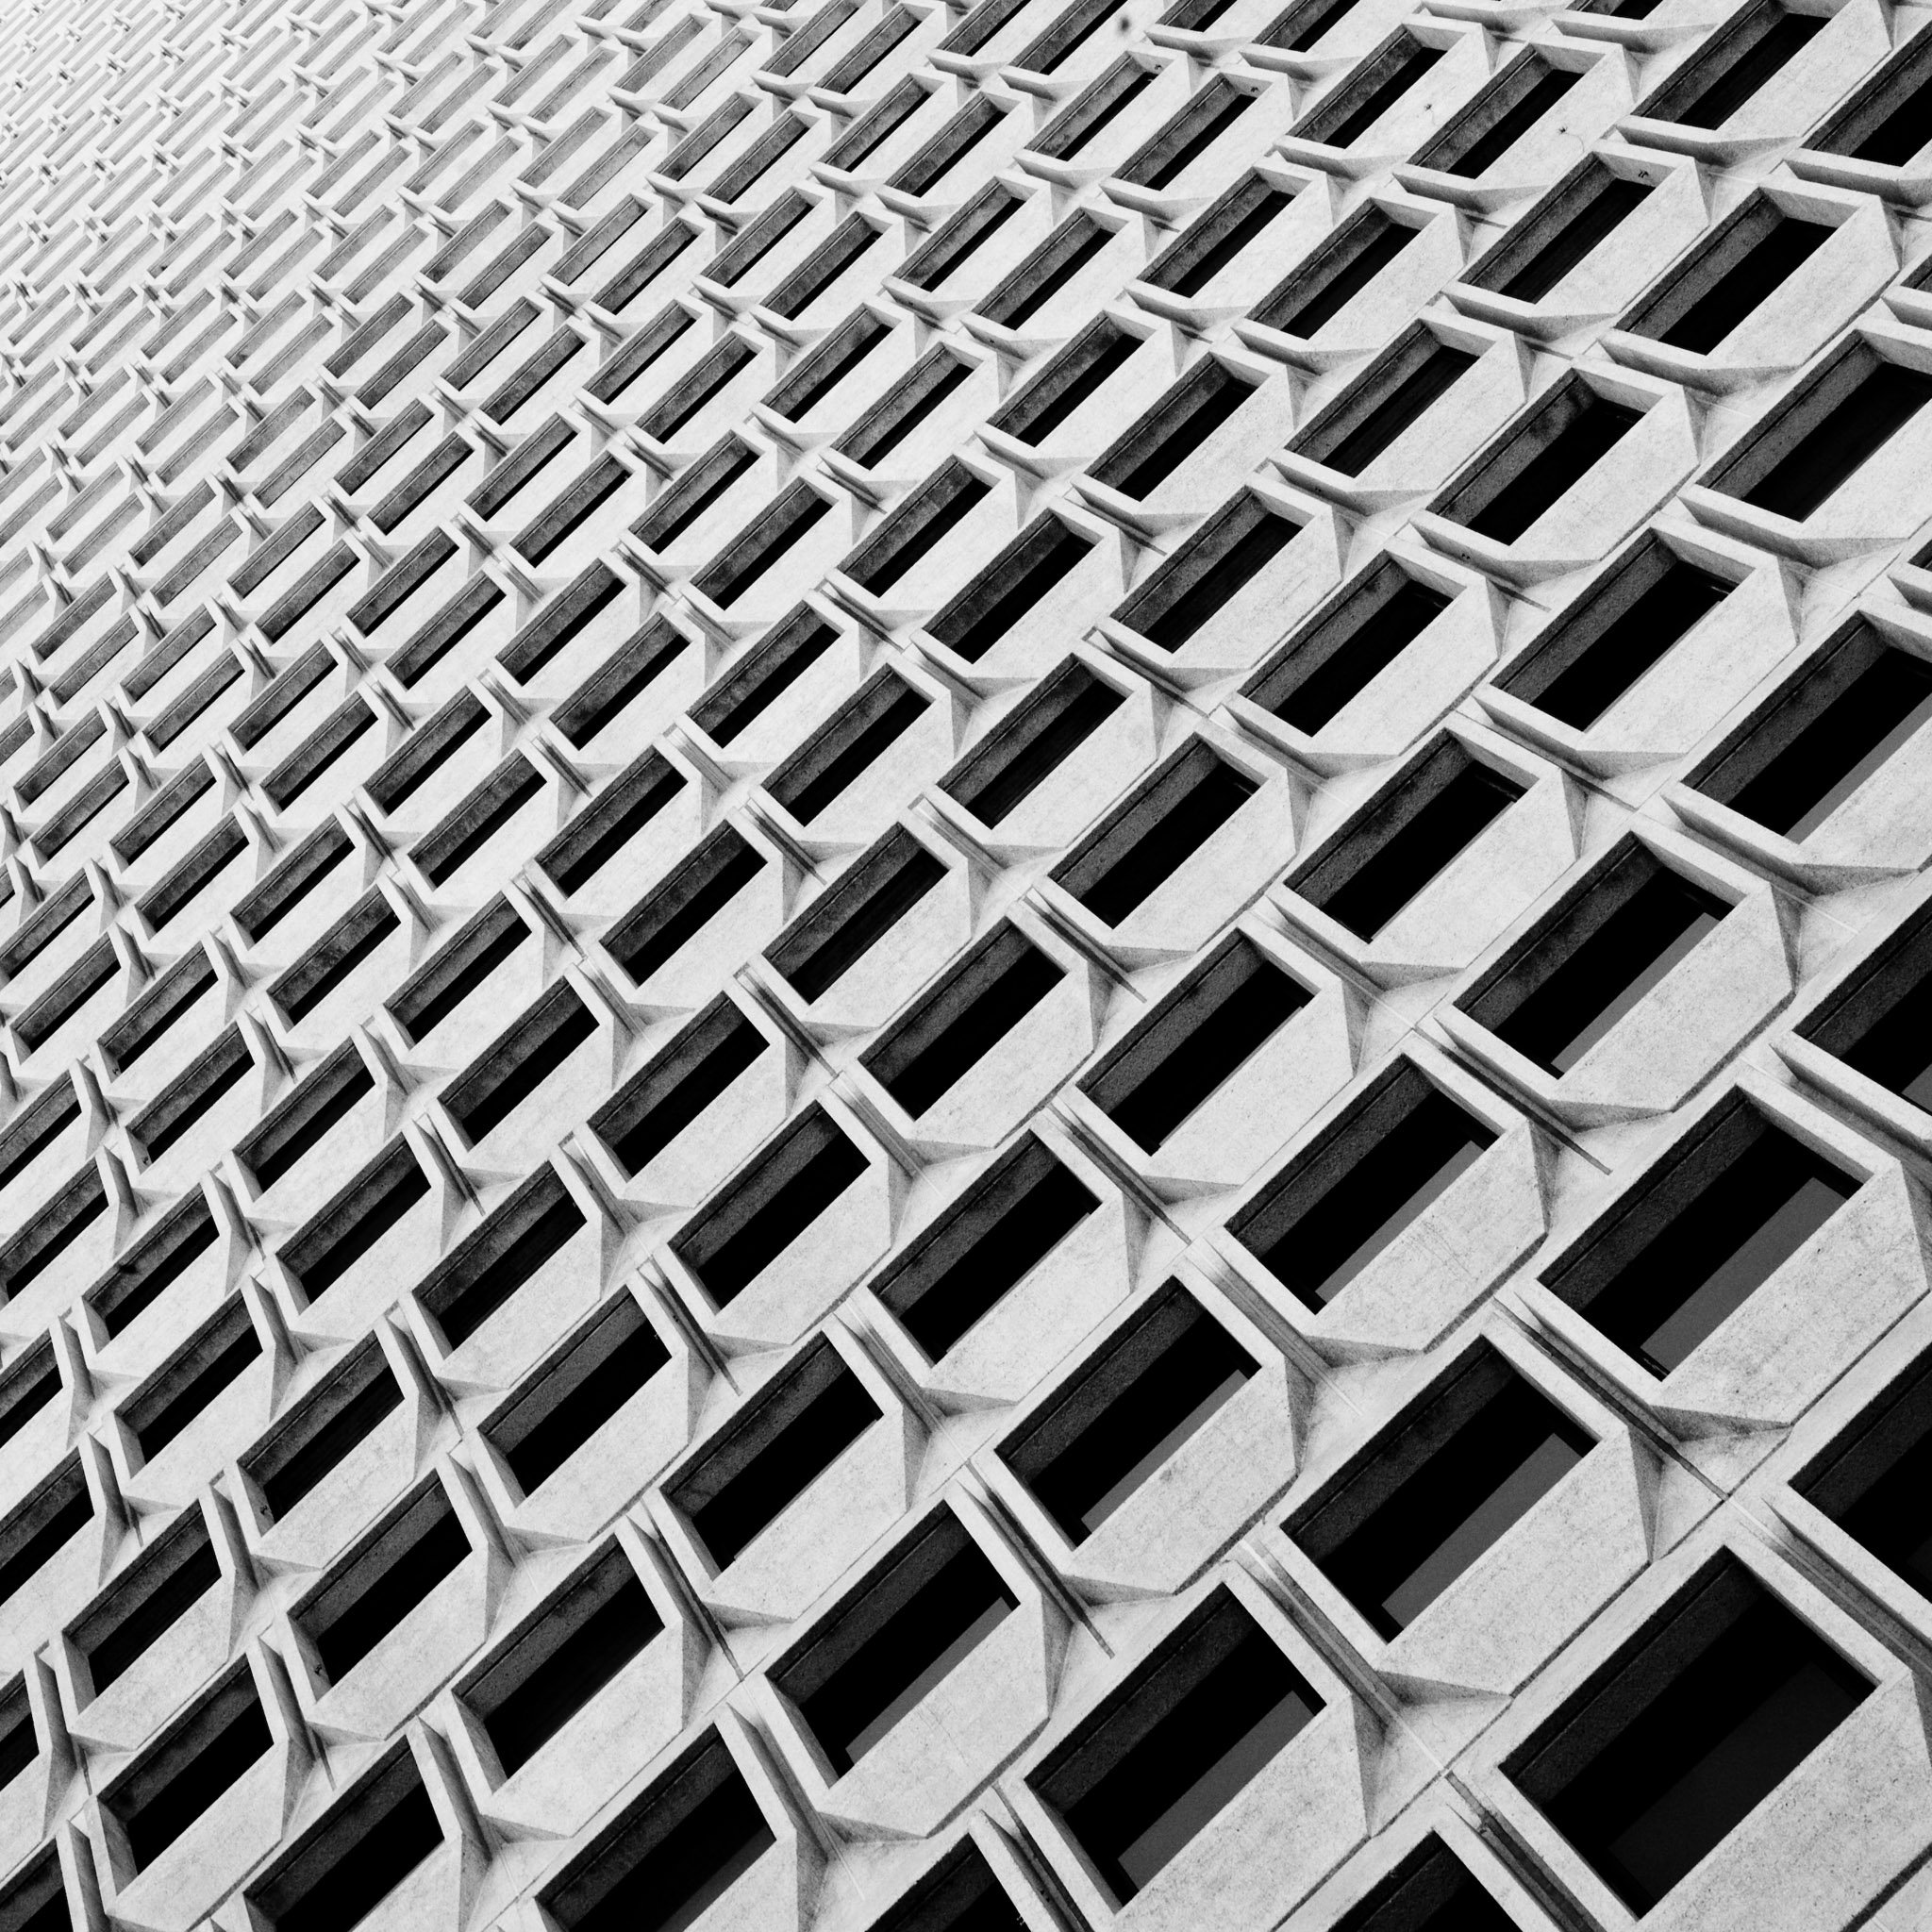 Abstract Architecture iPad wallpaper